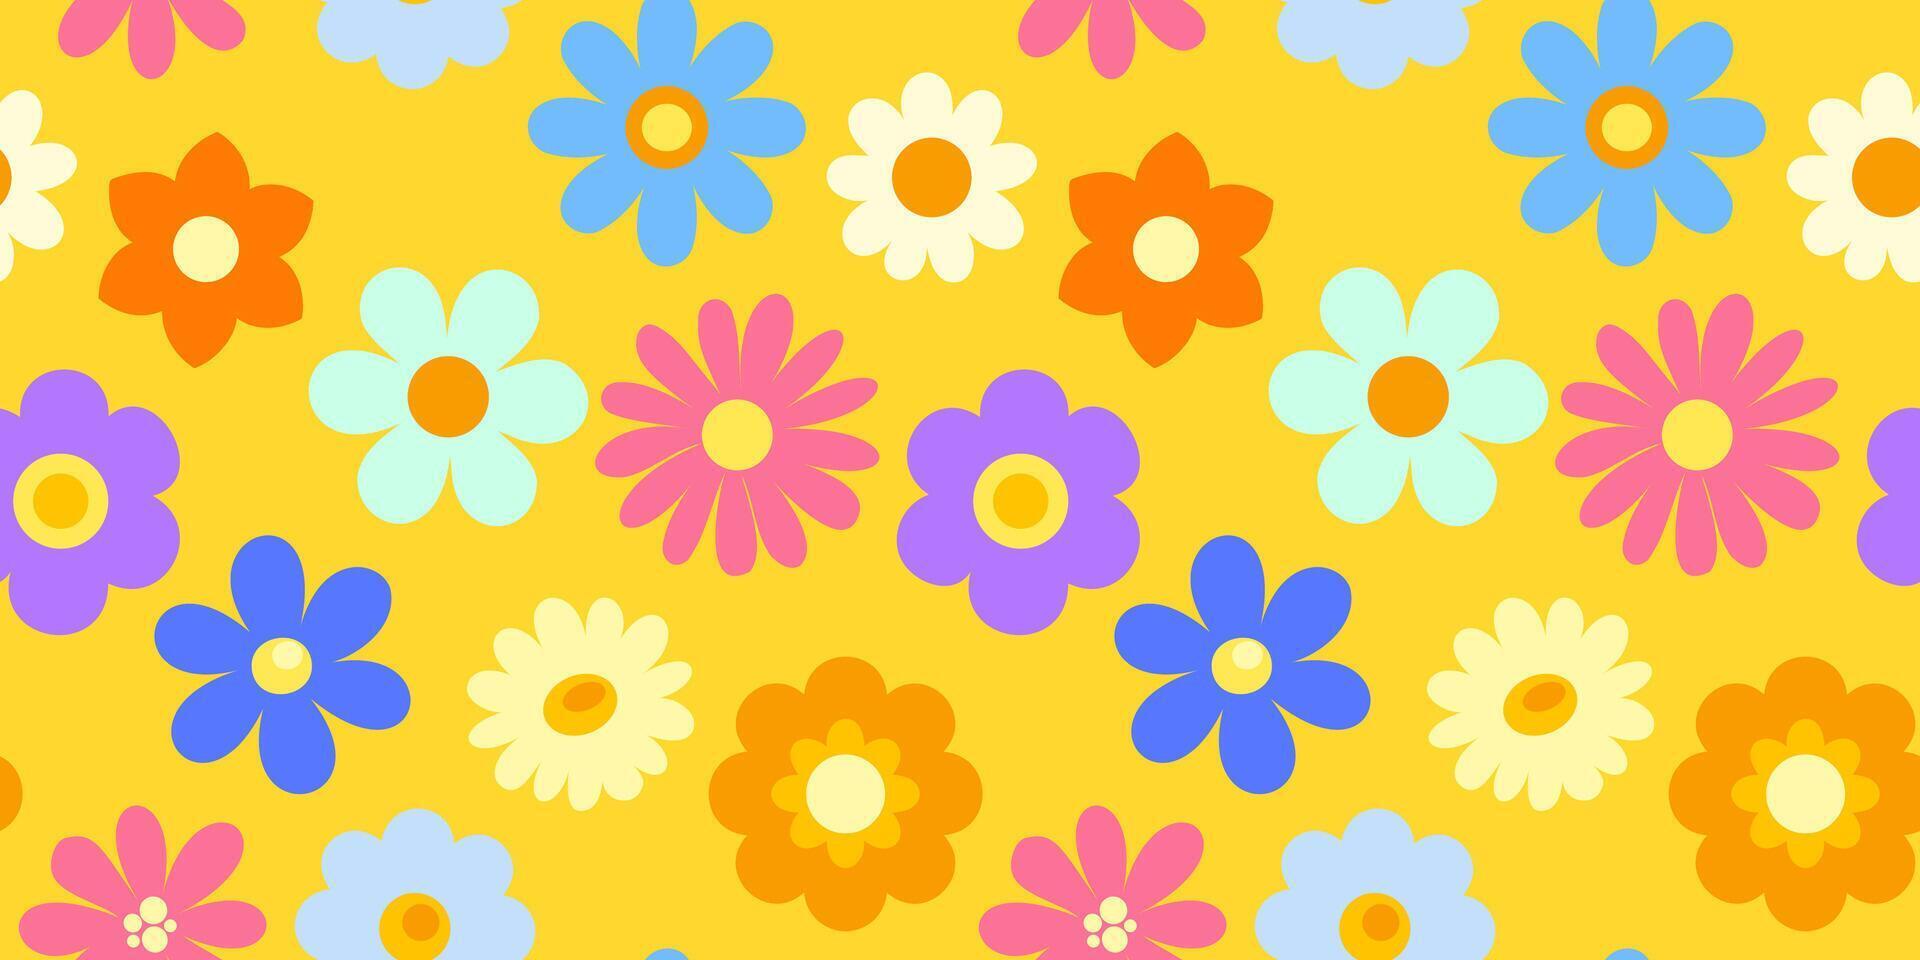 Seamless pattern with flowers vector